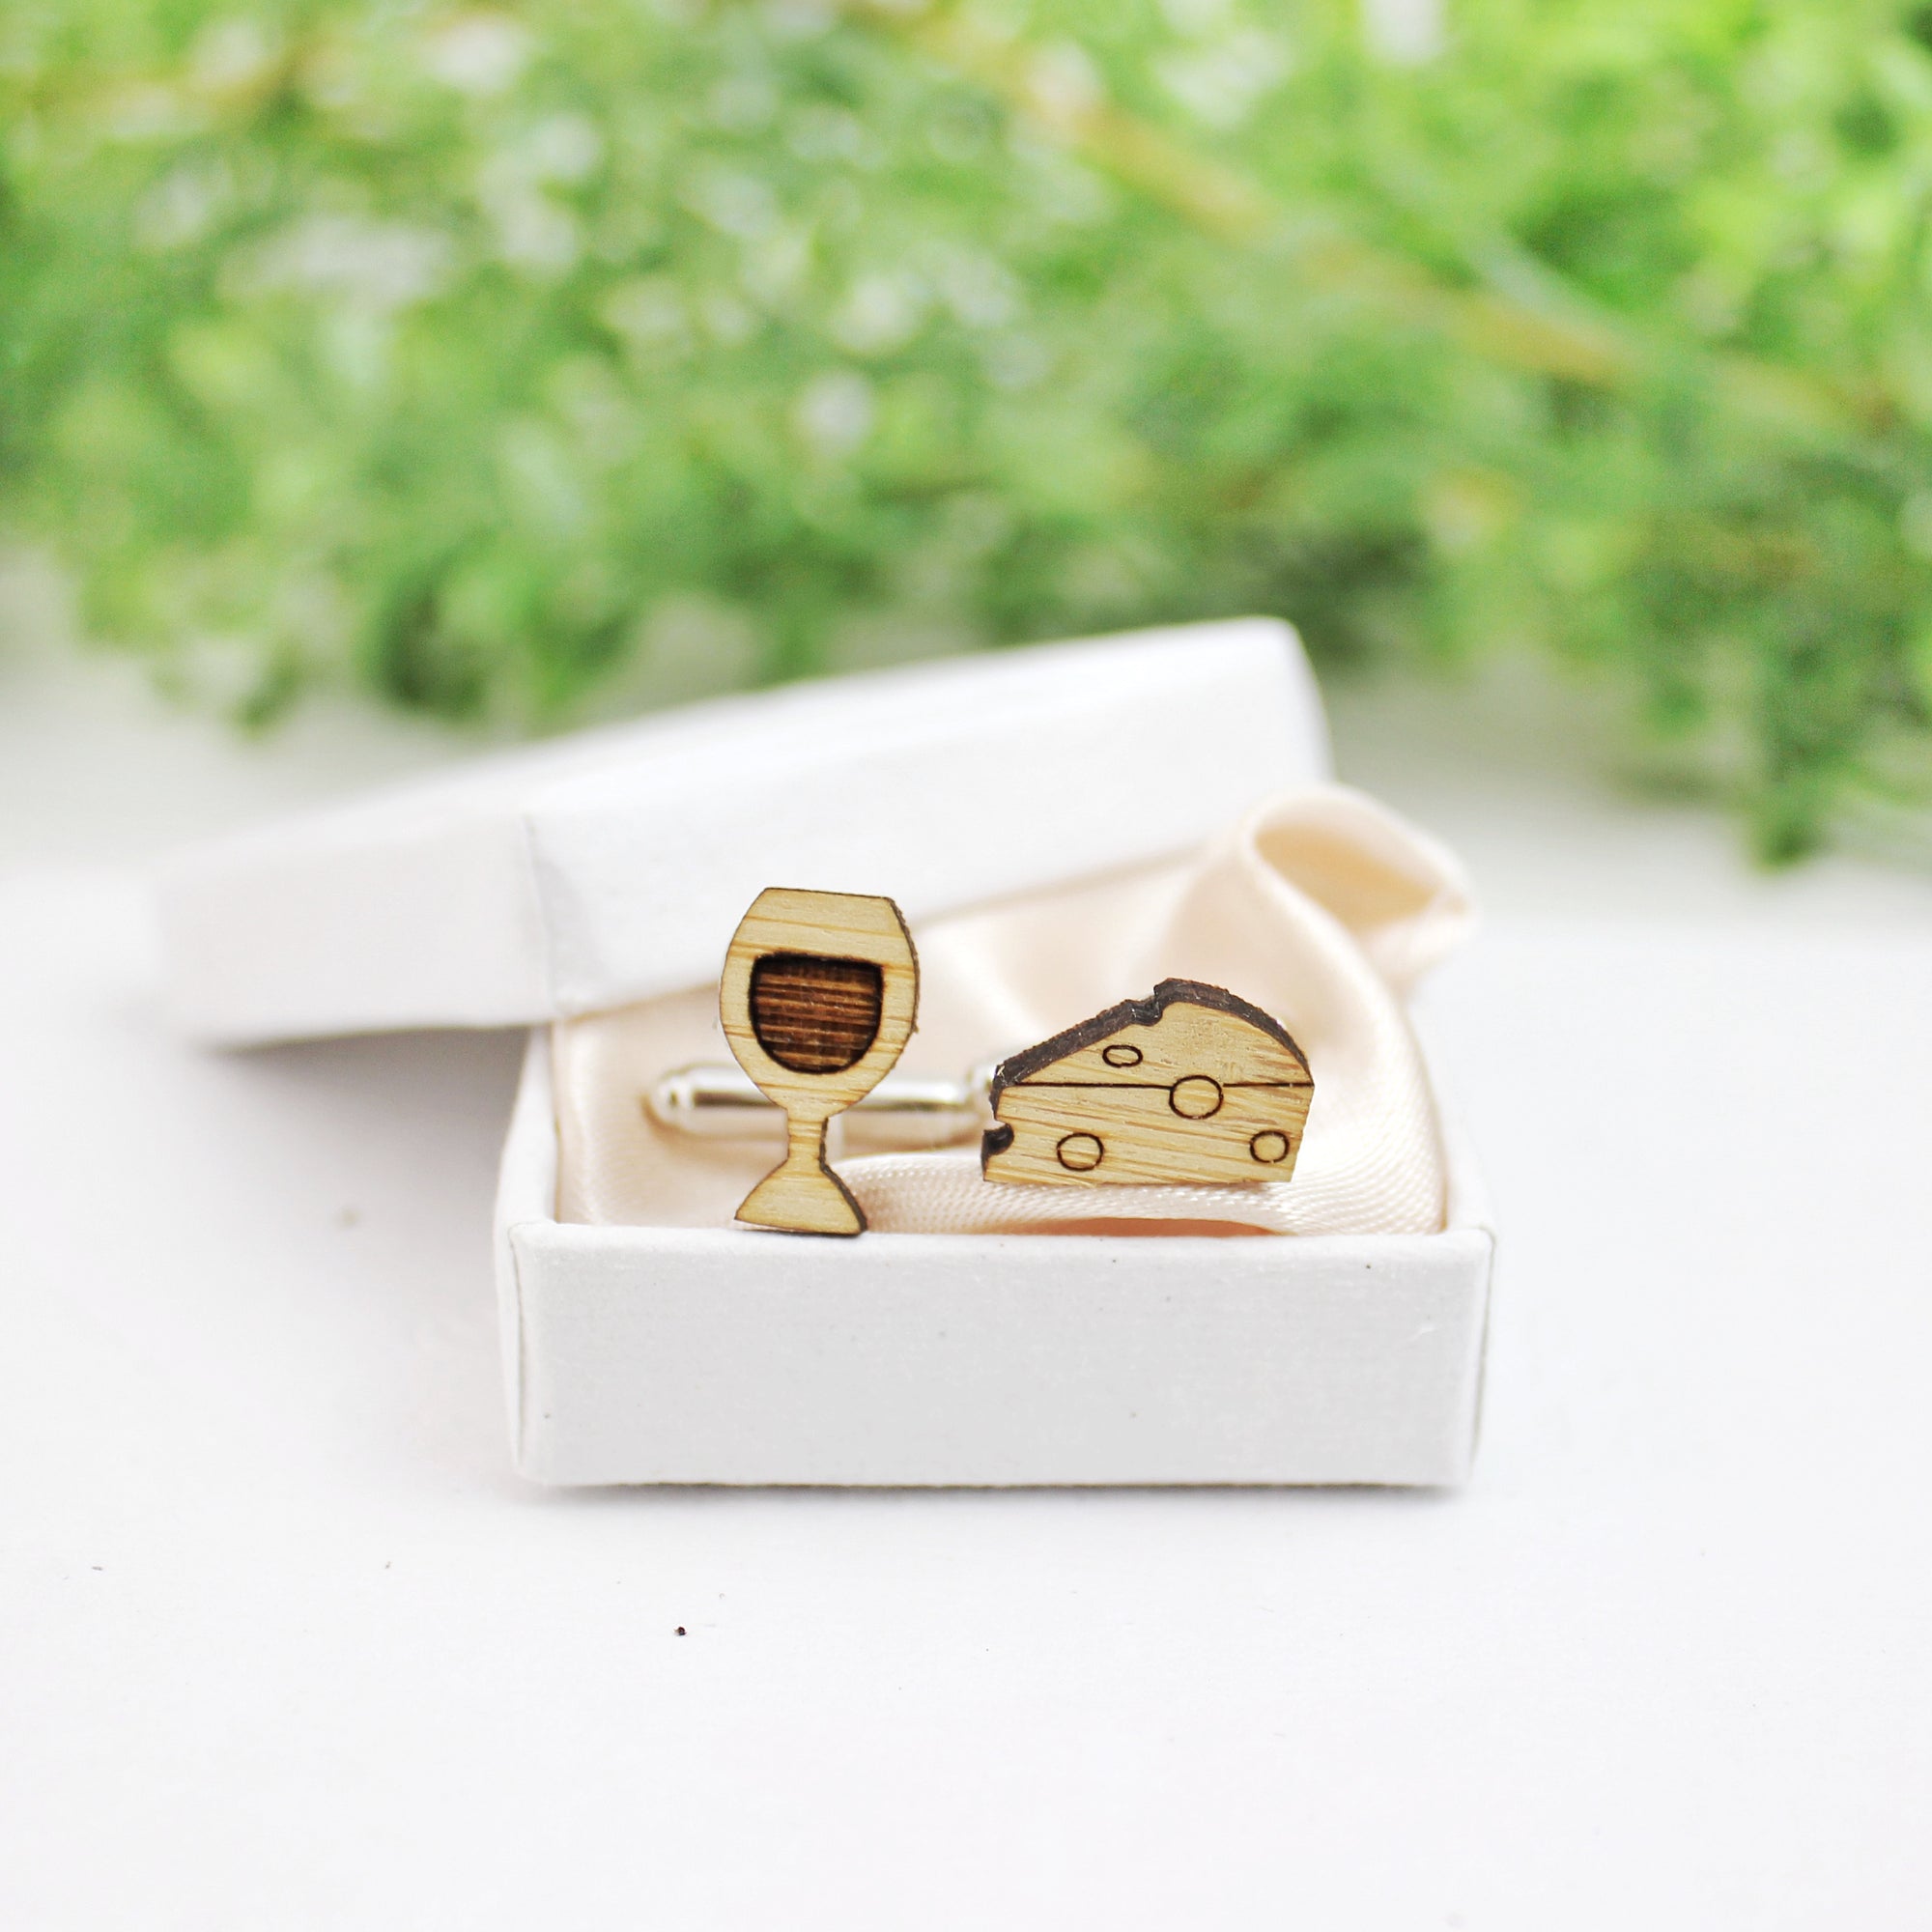 Wine and cheese cufflinks, wooden gift wedding anniversary, wine lover gift, gift for men